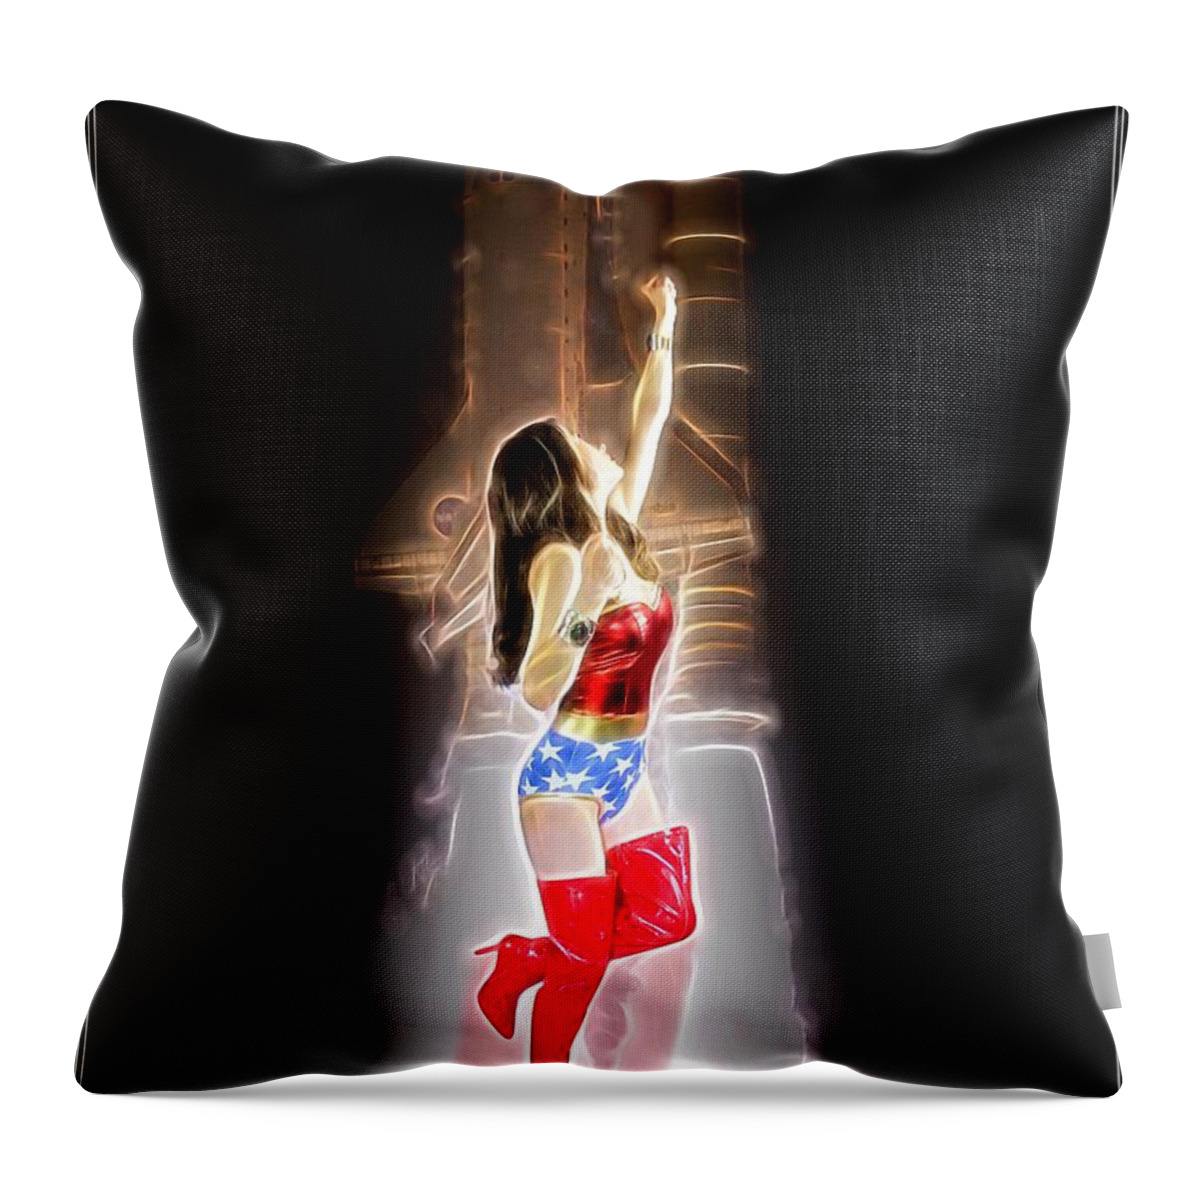 Fantasy Throw Pillow featuring the painting The Race To Space by Jon Volden